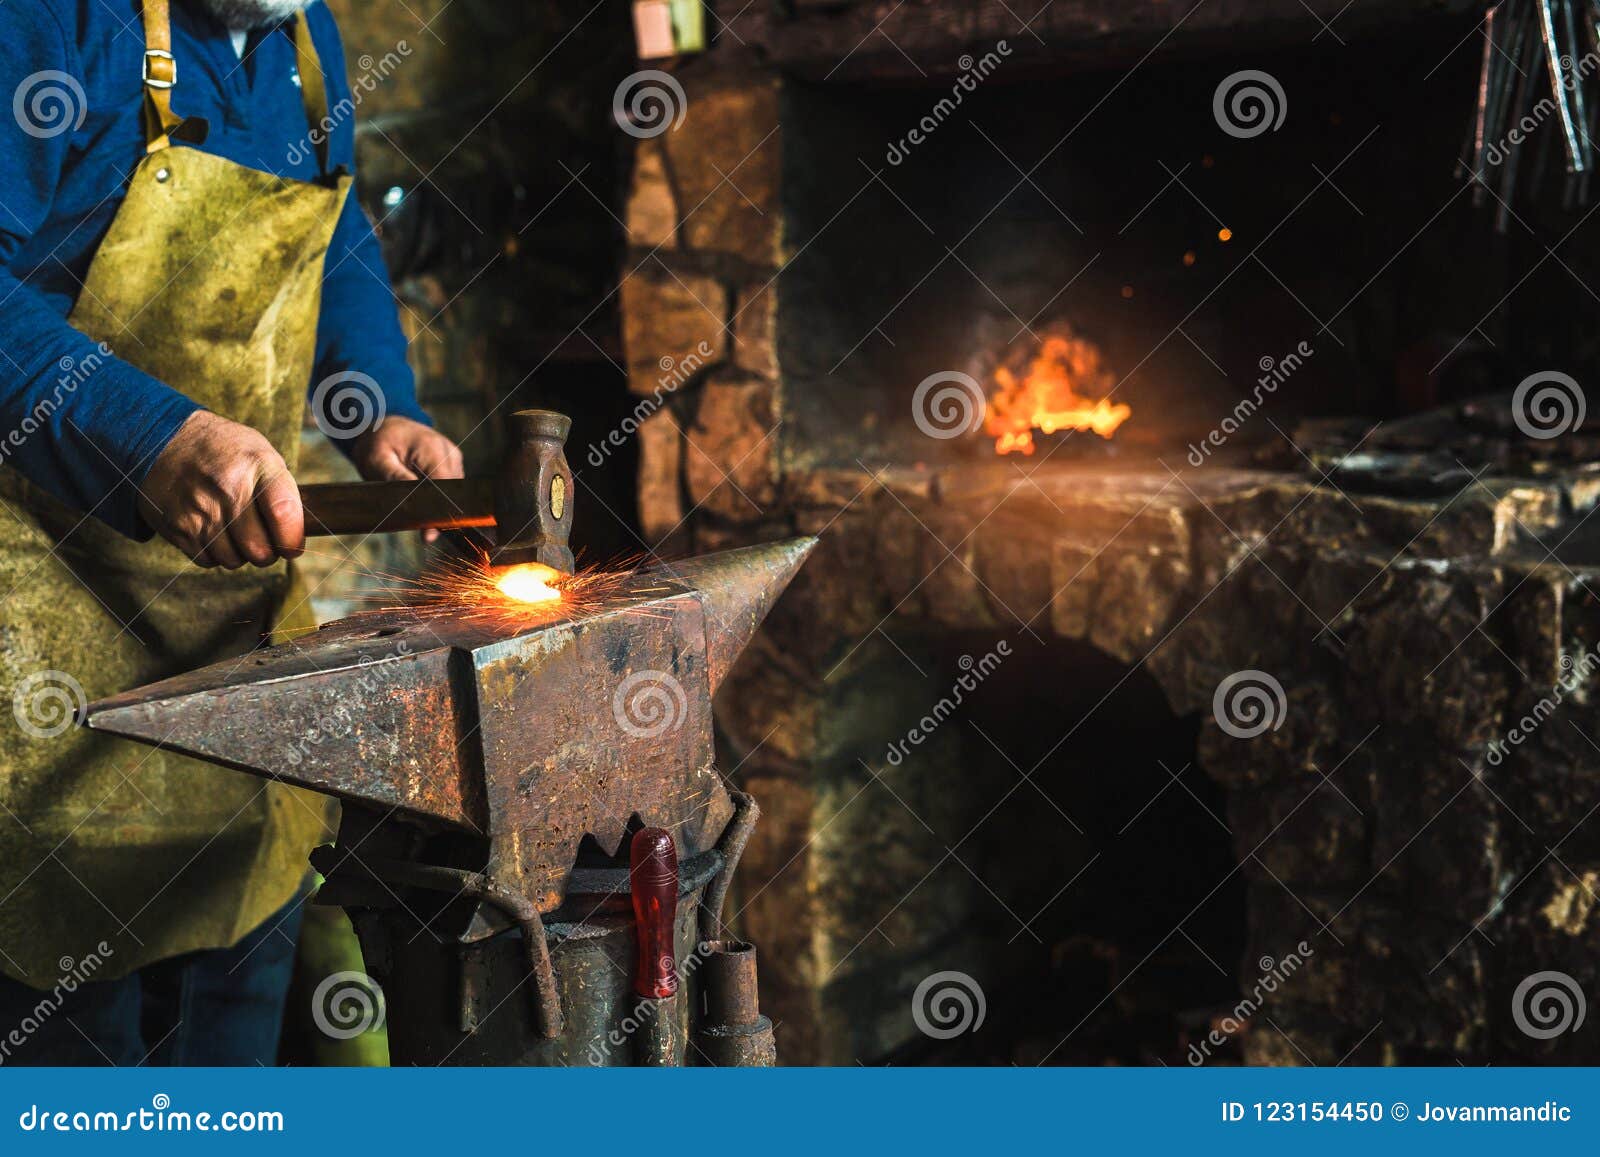 blacksmith manually forging the molten metal on the anvil in smithy